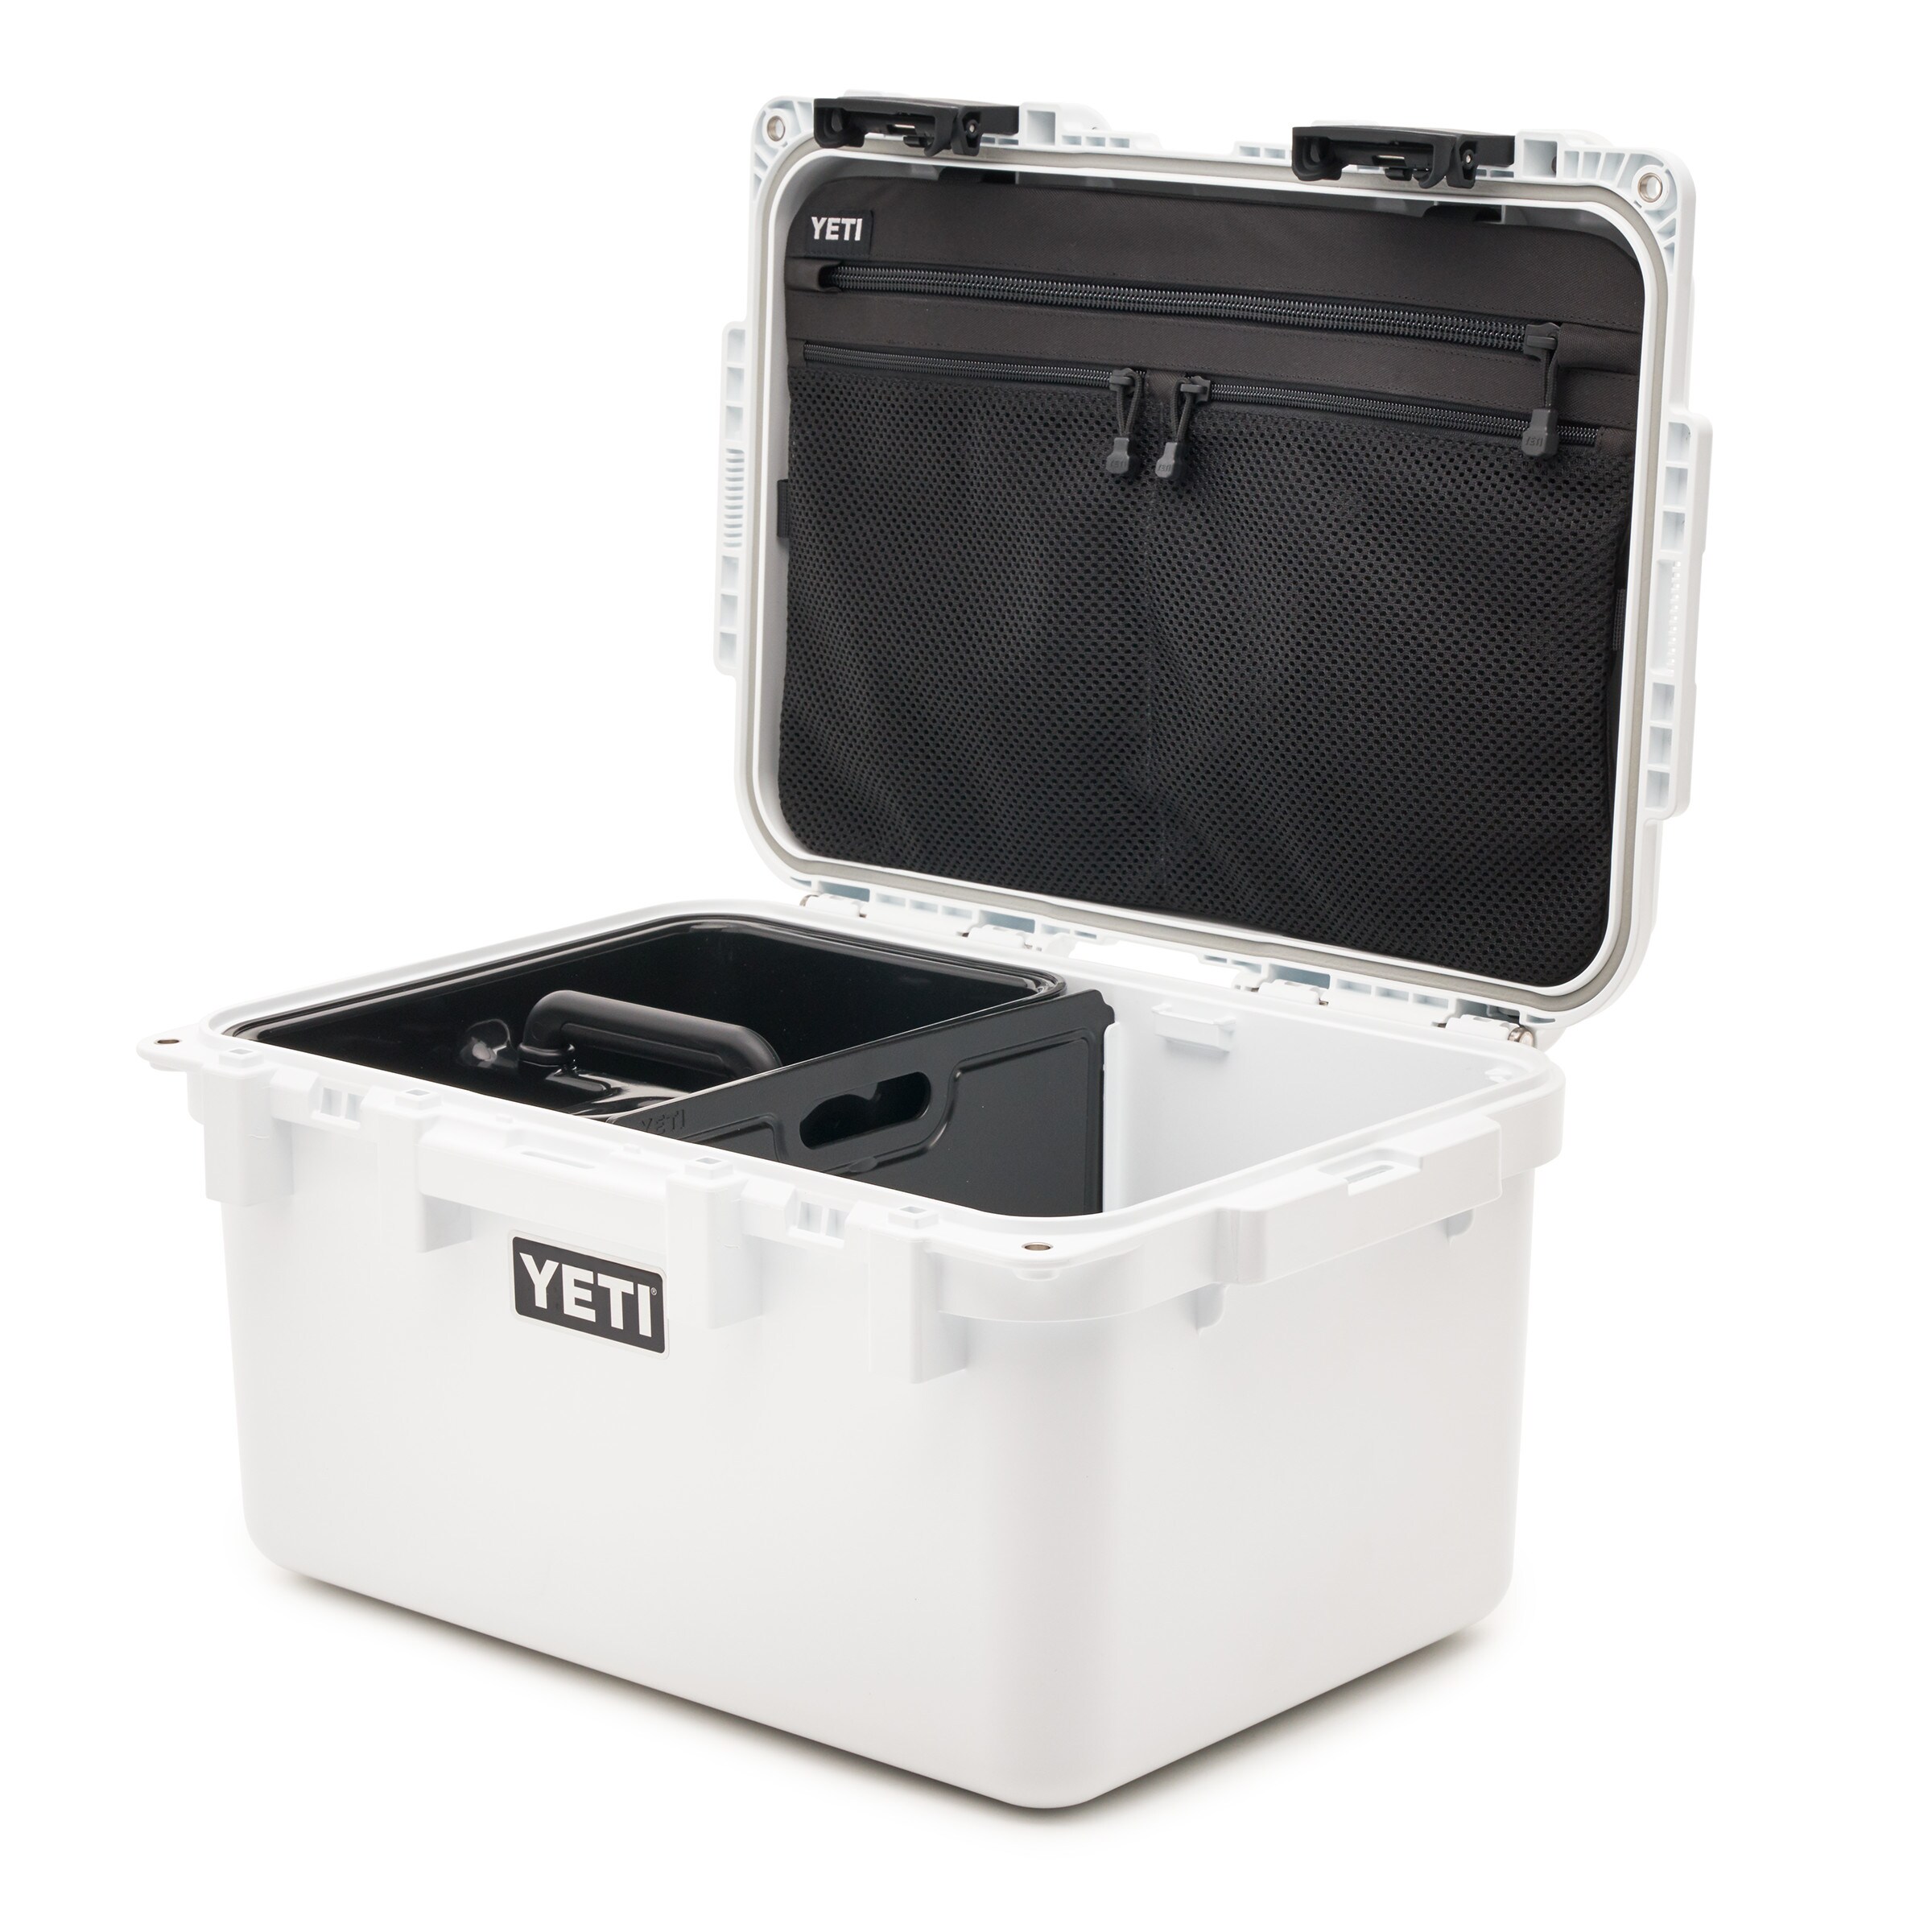 Yeti LoadOut GoBox 15 Gearbox White 26010000195 from Yeti - Acme Tools